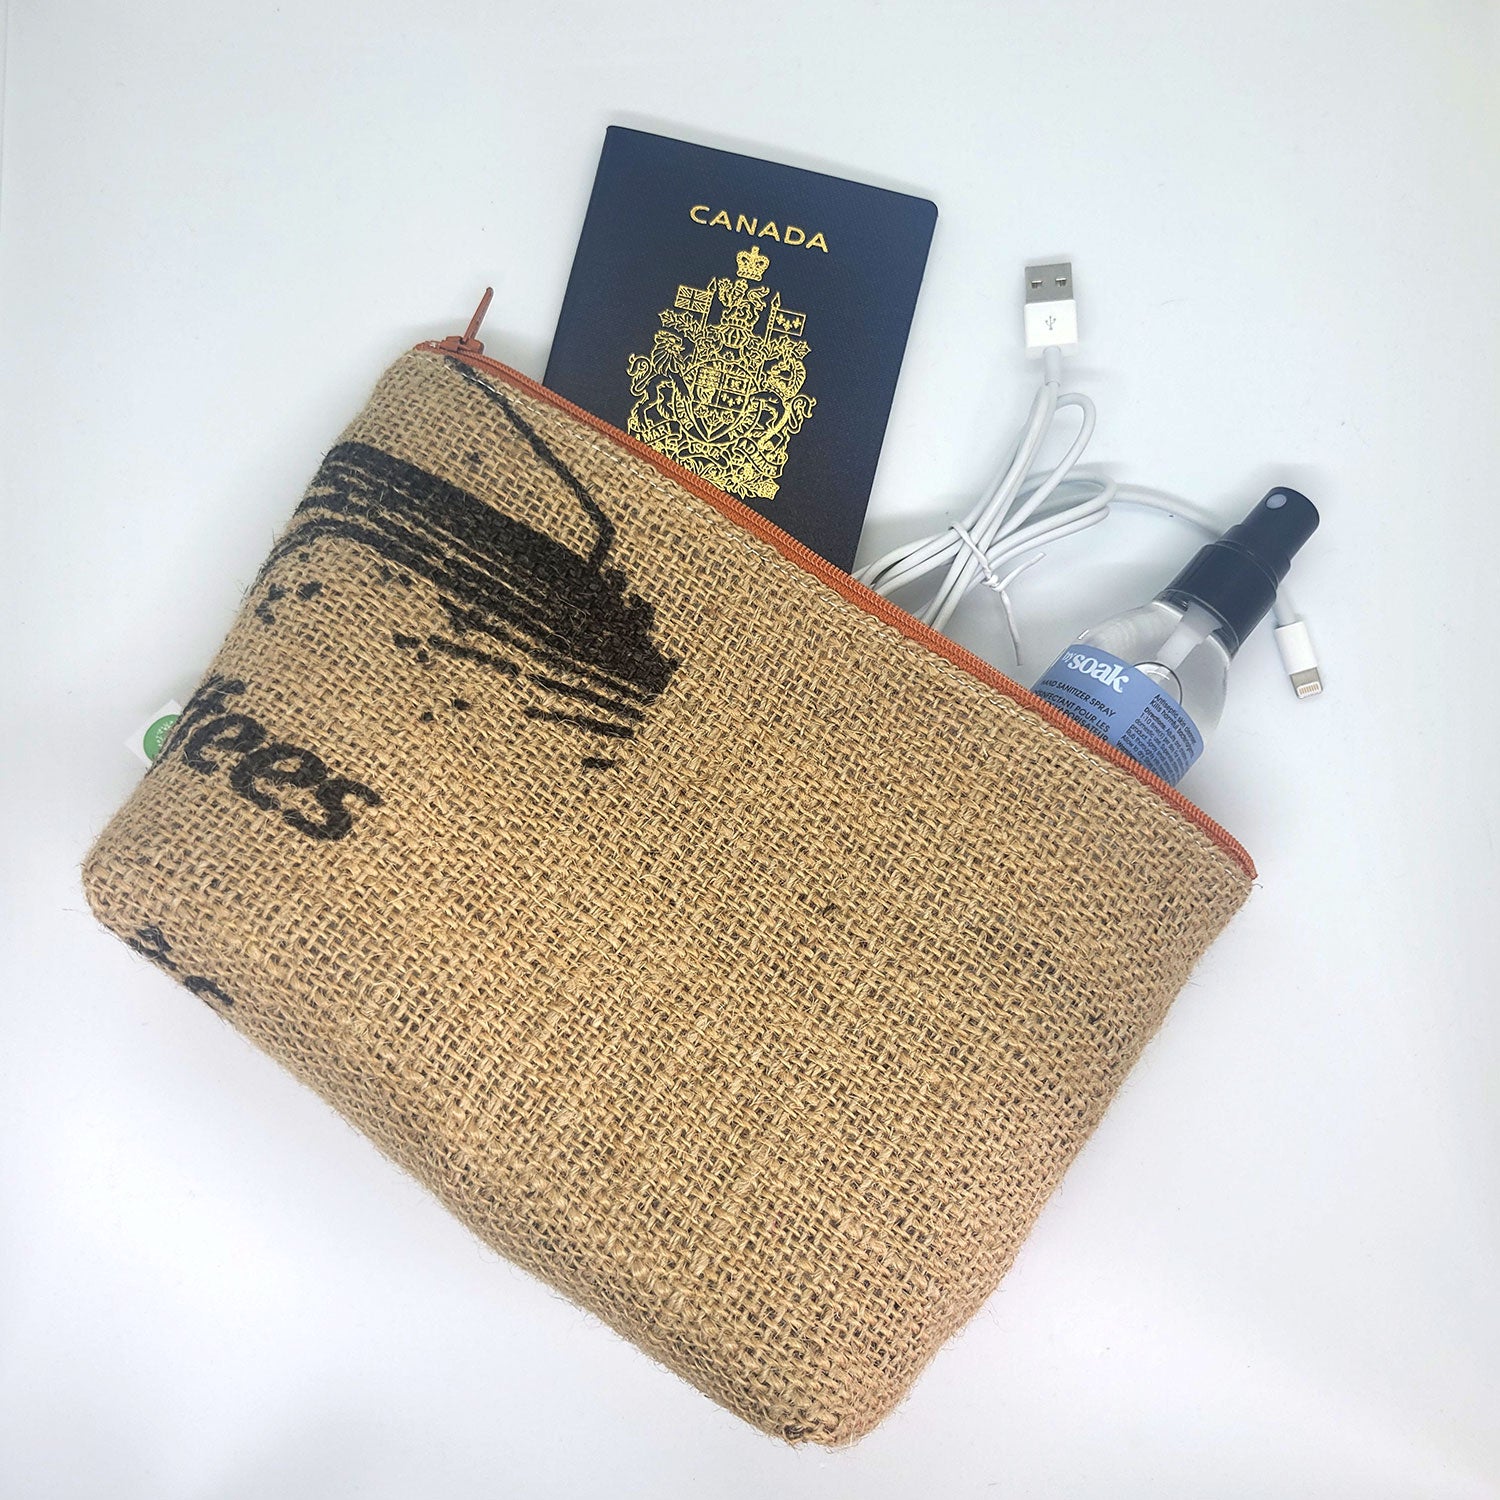 upcycled coffee sack zipper bag for travel